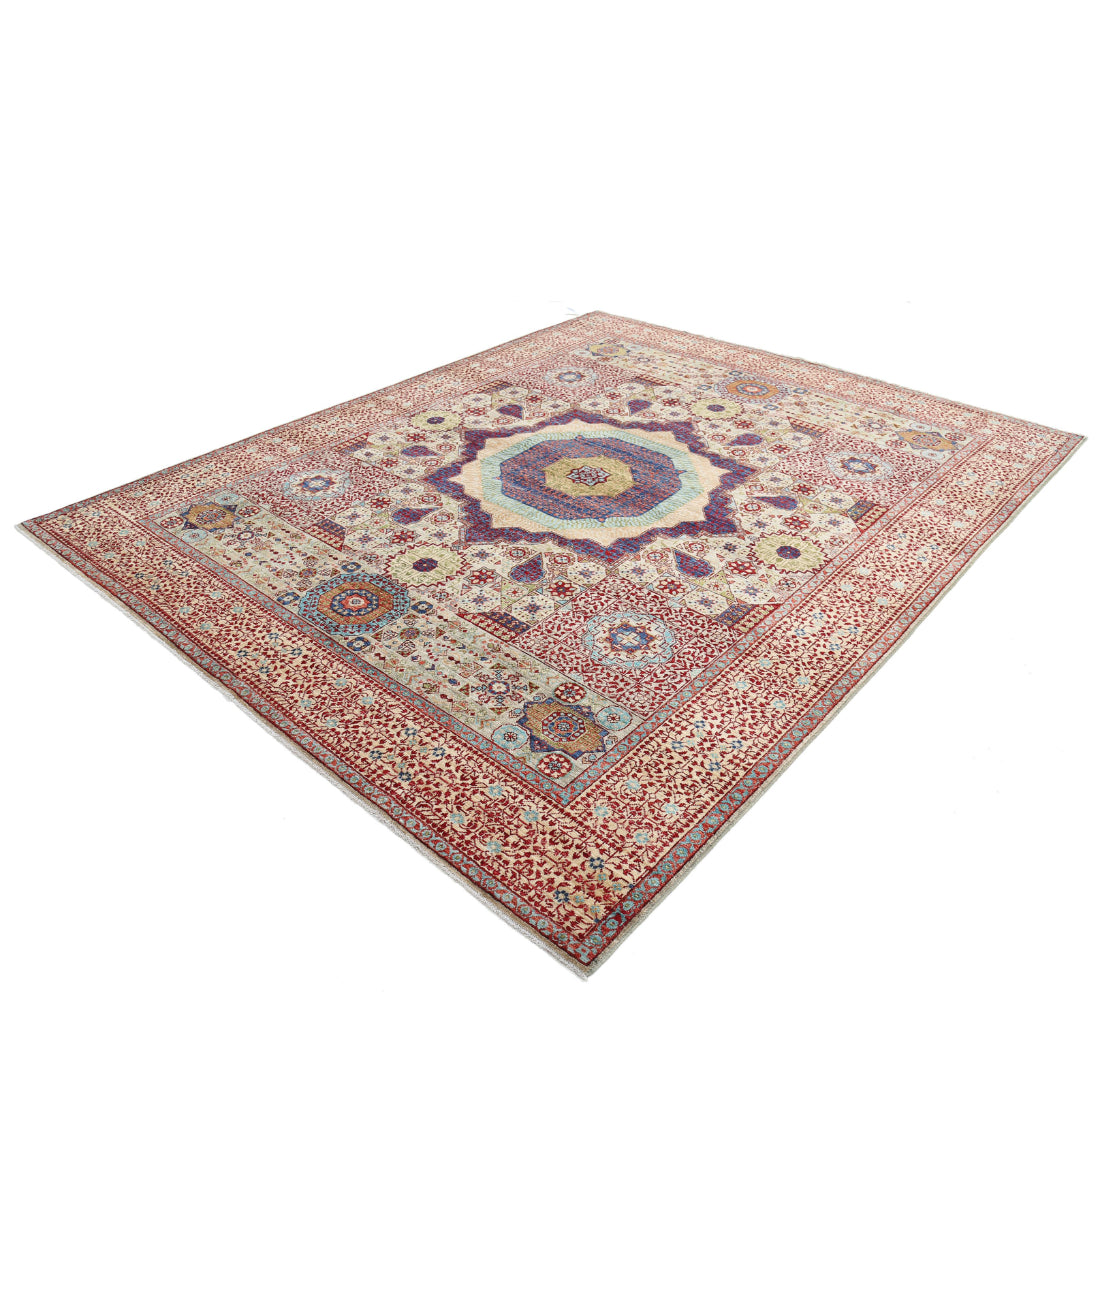 Mamluk 8'1'' X 10'0'' Hand-Knotted Wool Rug 8'1'' x 10'0'' (243 X 300) / Beige / Red